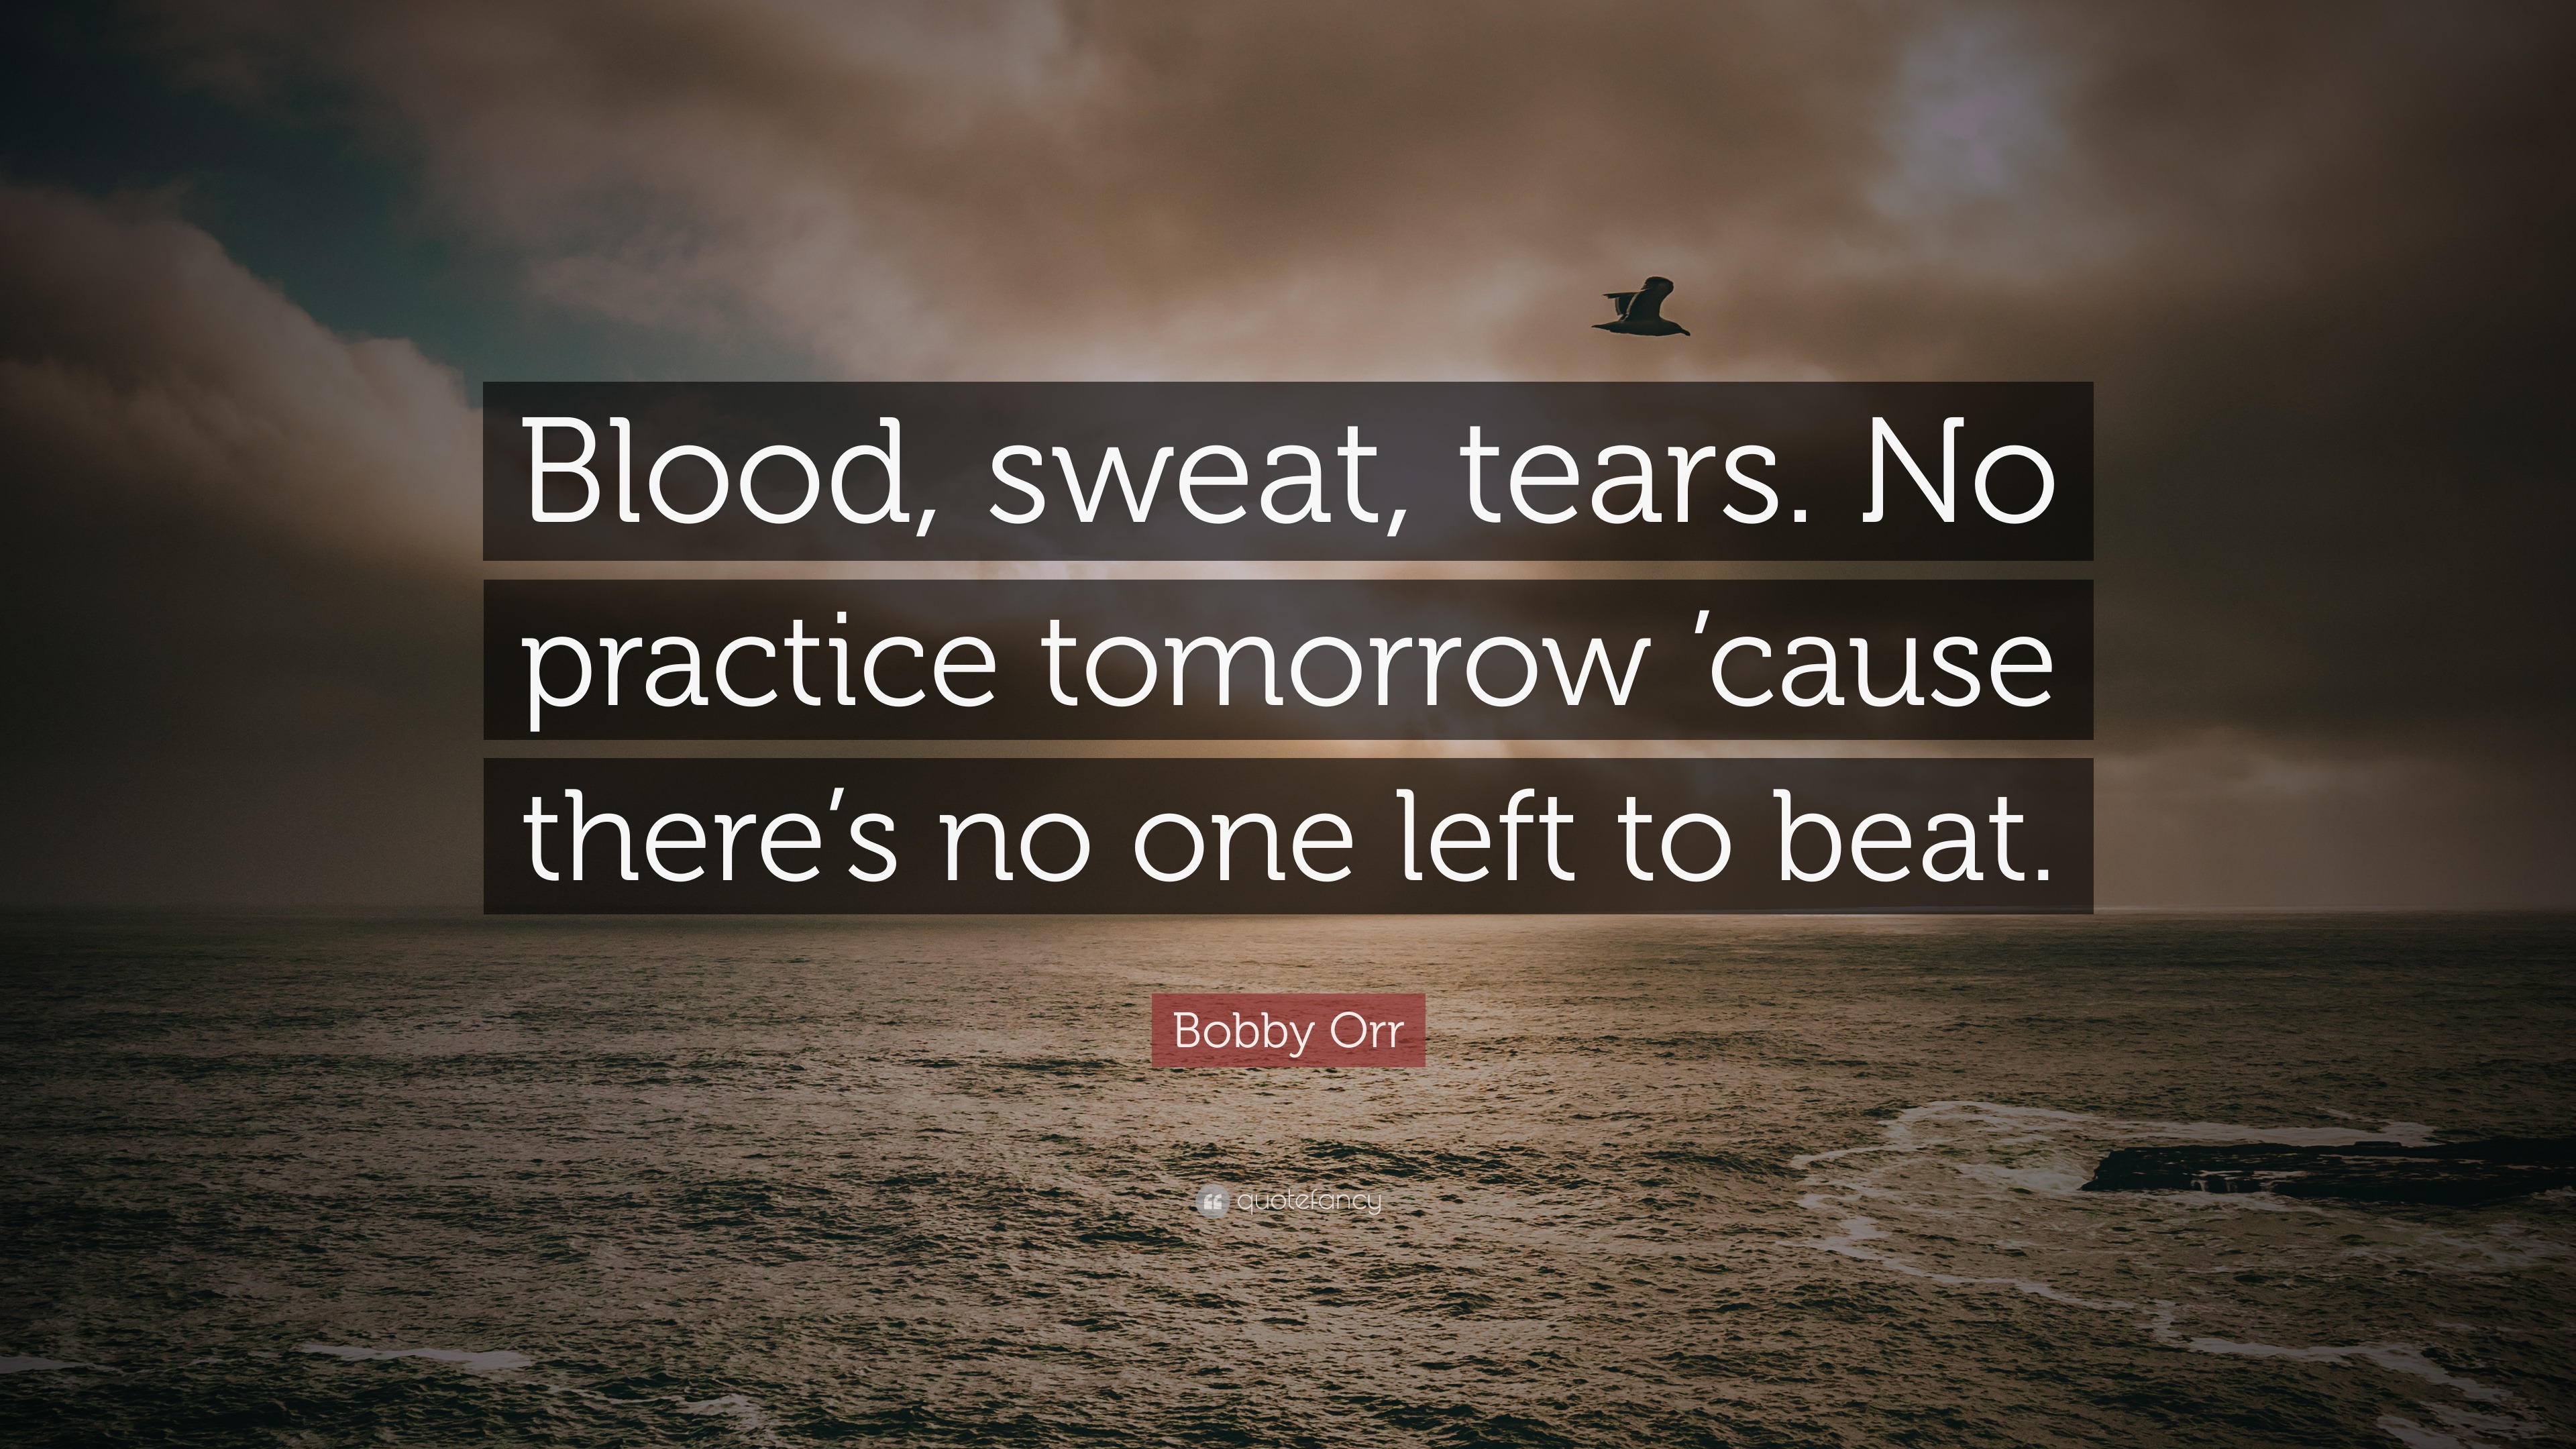 Bobby Orr Quote: “Blood, sweat, tears. No practice tomorrow 'cause